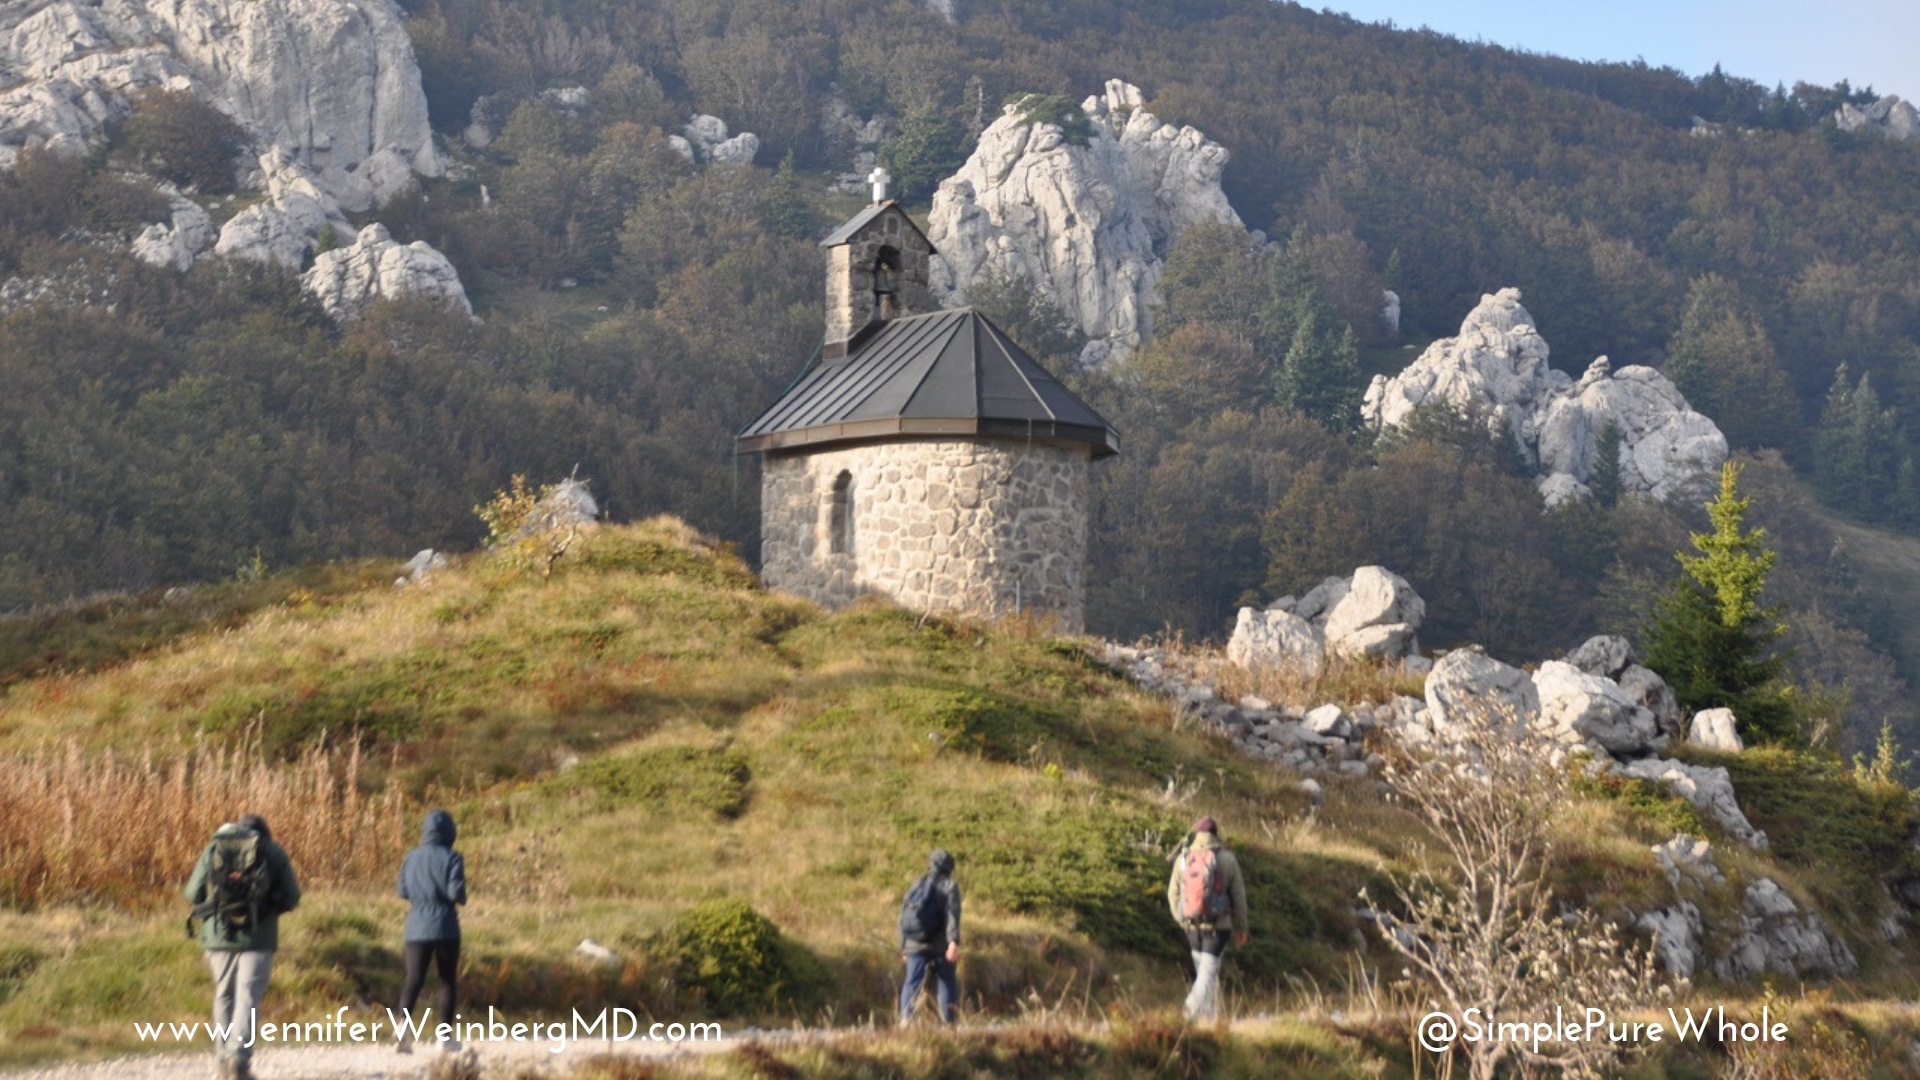 Northern #Velebit National Park #Hike with Me Croatia's National Parks #Croatia #Travel Guide #croatiatravelguide #hiking #outdoors #nature #nationalpark #travel #walking #mountain #mountaineering #travelguide #travelinspiration #croatian #croatiatravel